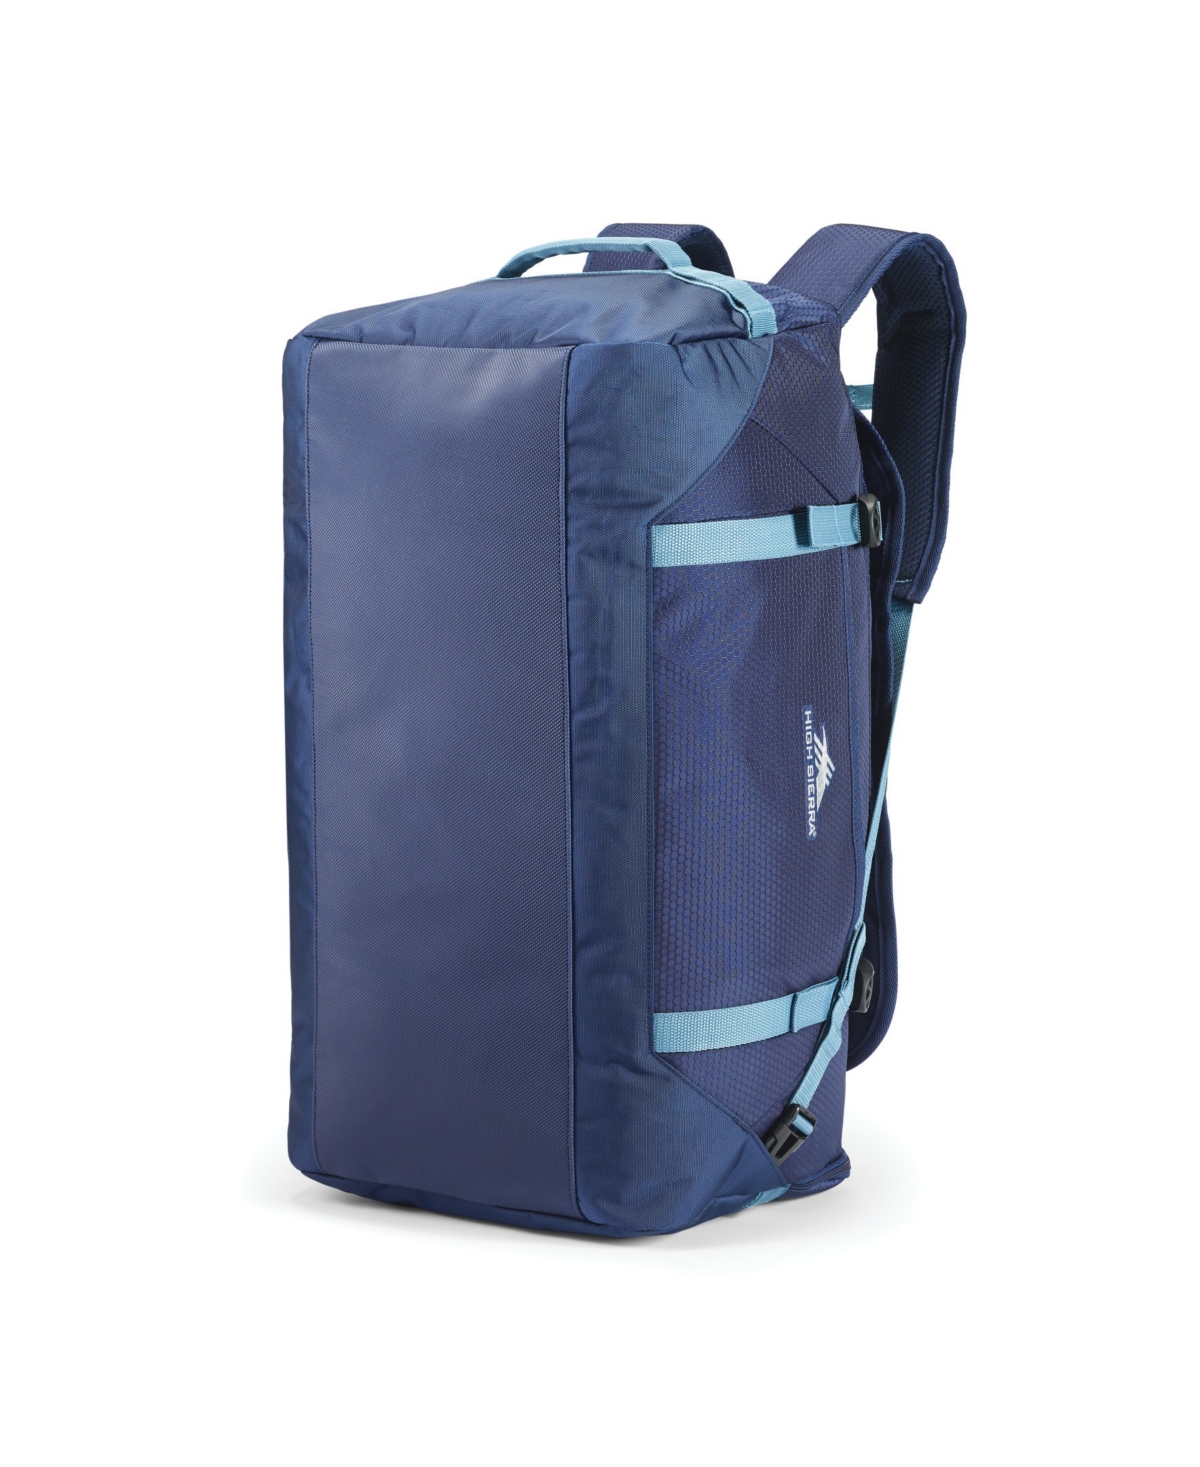 Fairlead Duffel-Backpack - True Navy and Graphite Blue